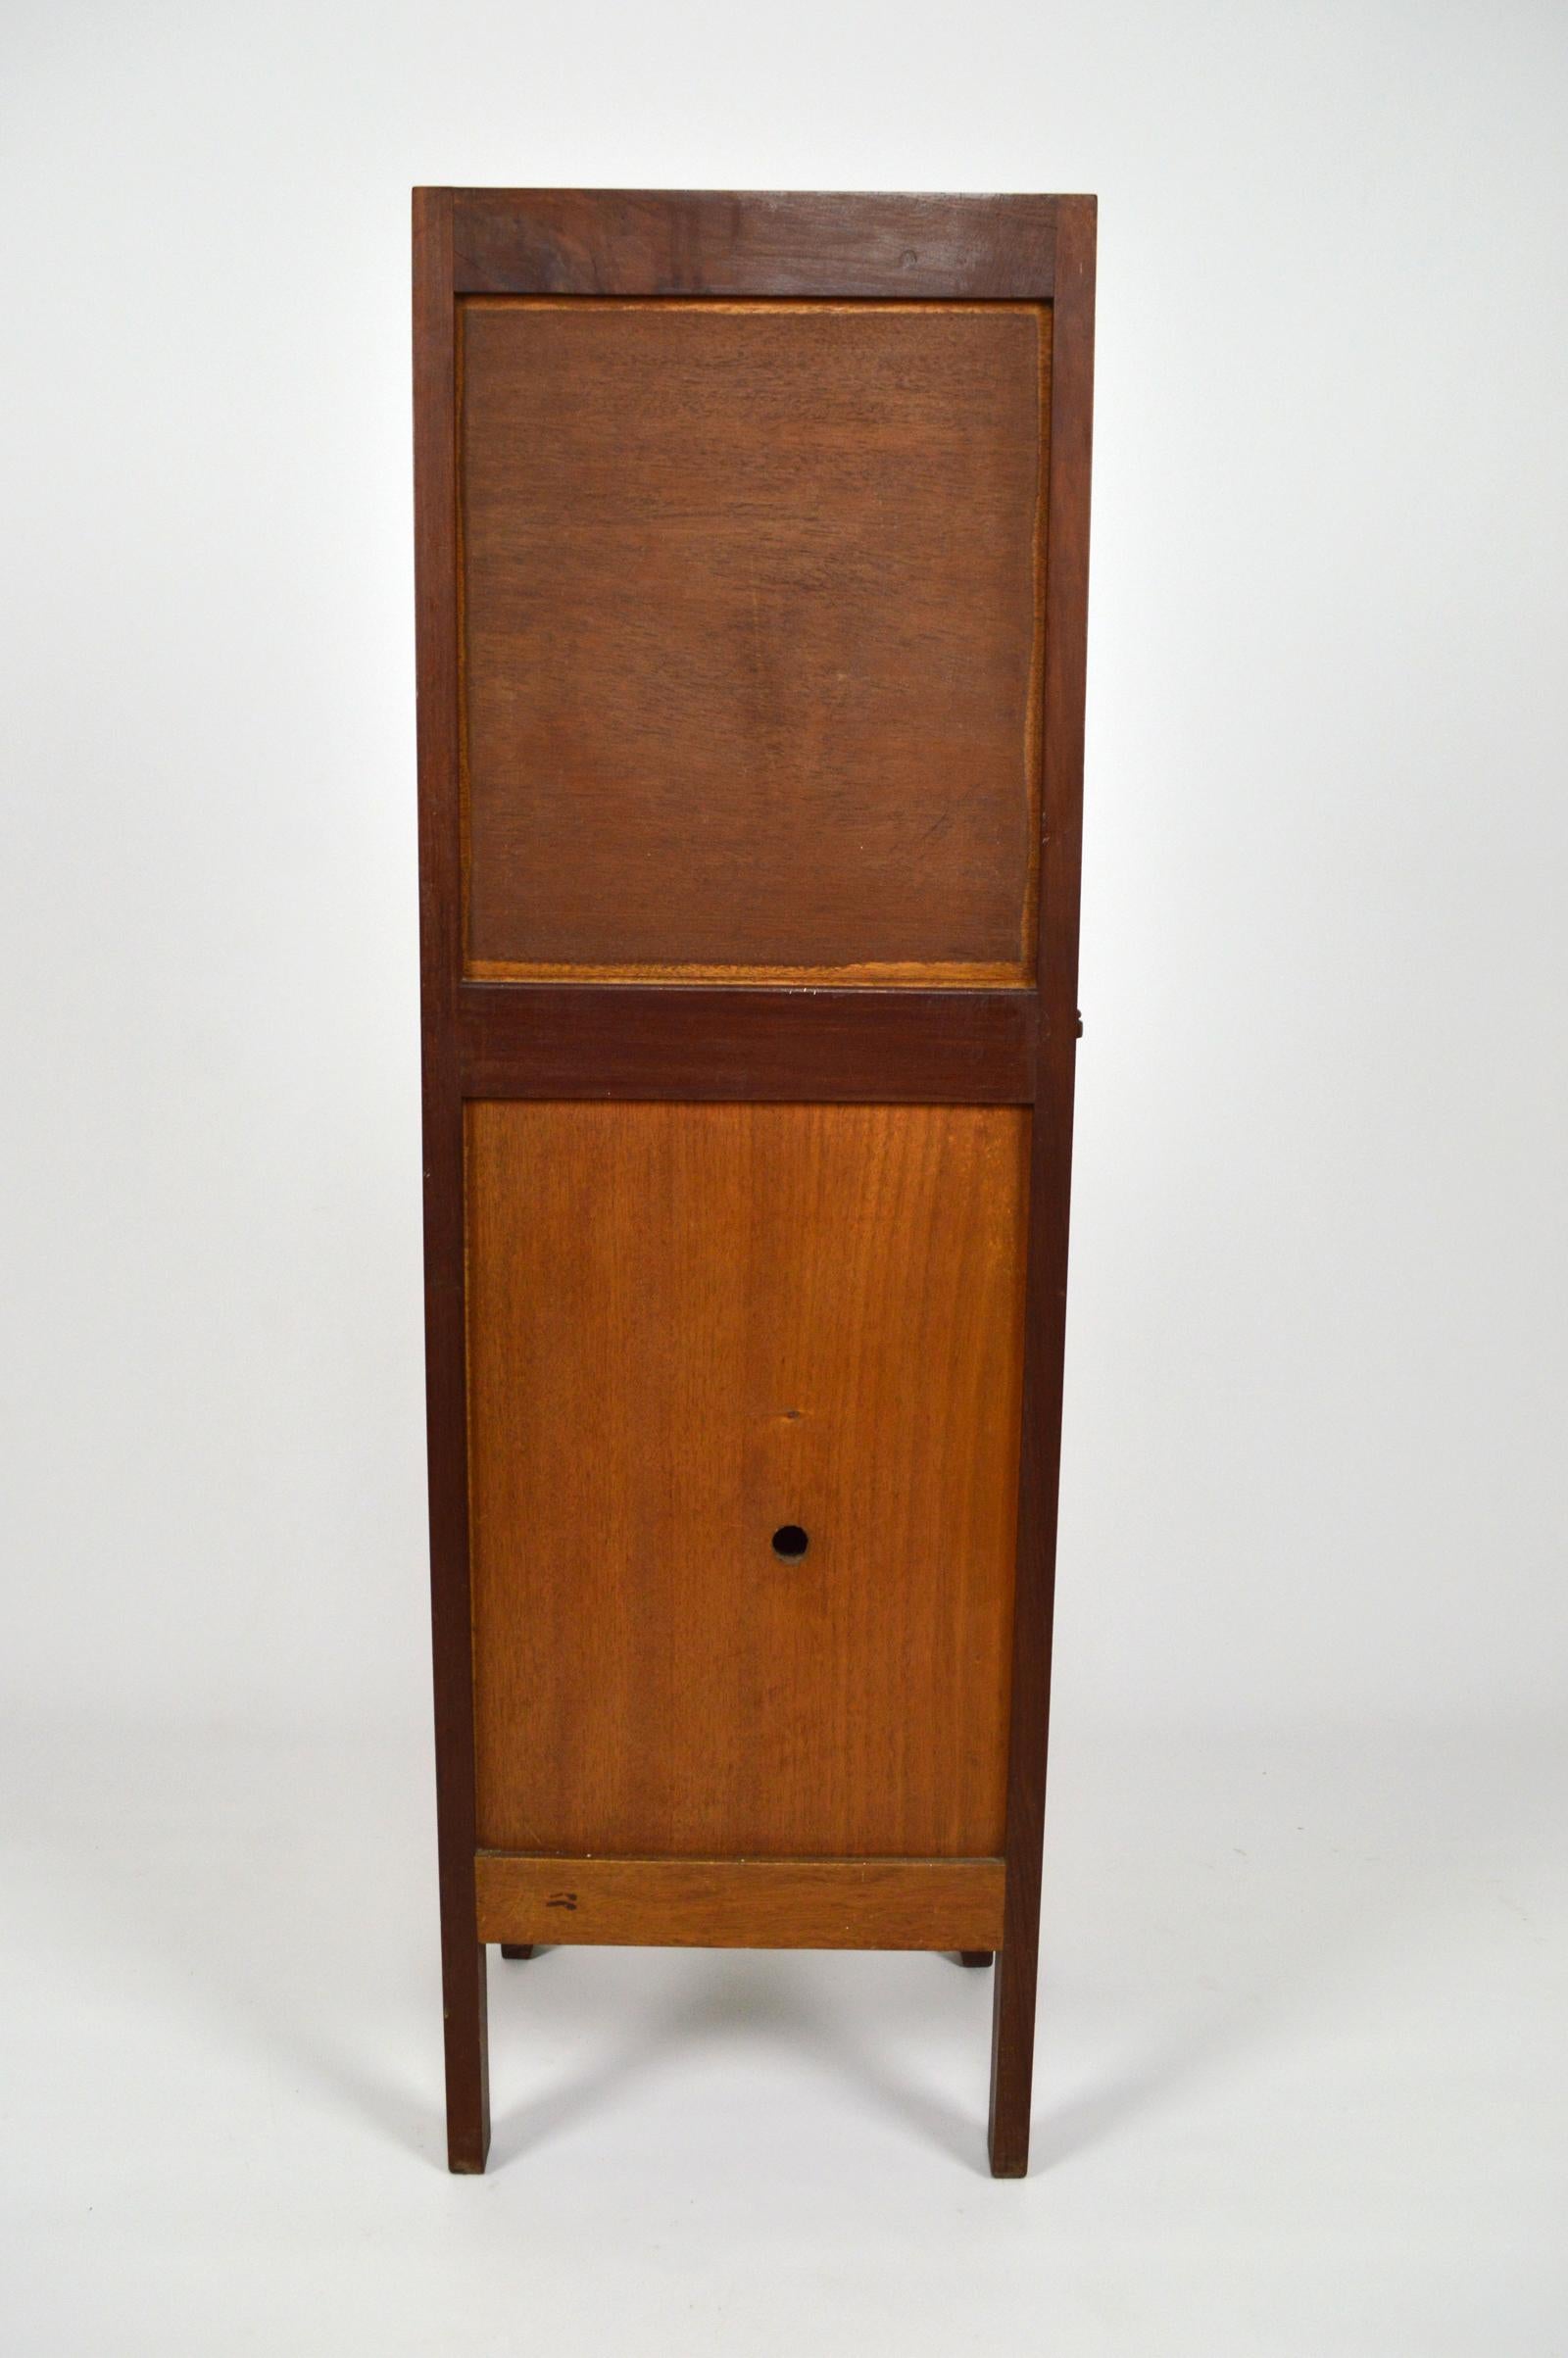 Early 20th Century Art Nouveau Bedside Table by Mathieu Gallerey in Mahogany, France, circa 1920 For Sale